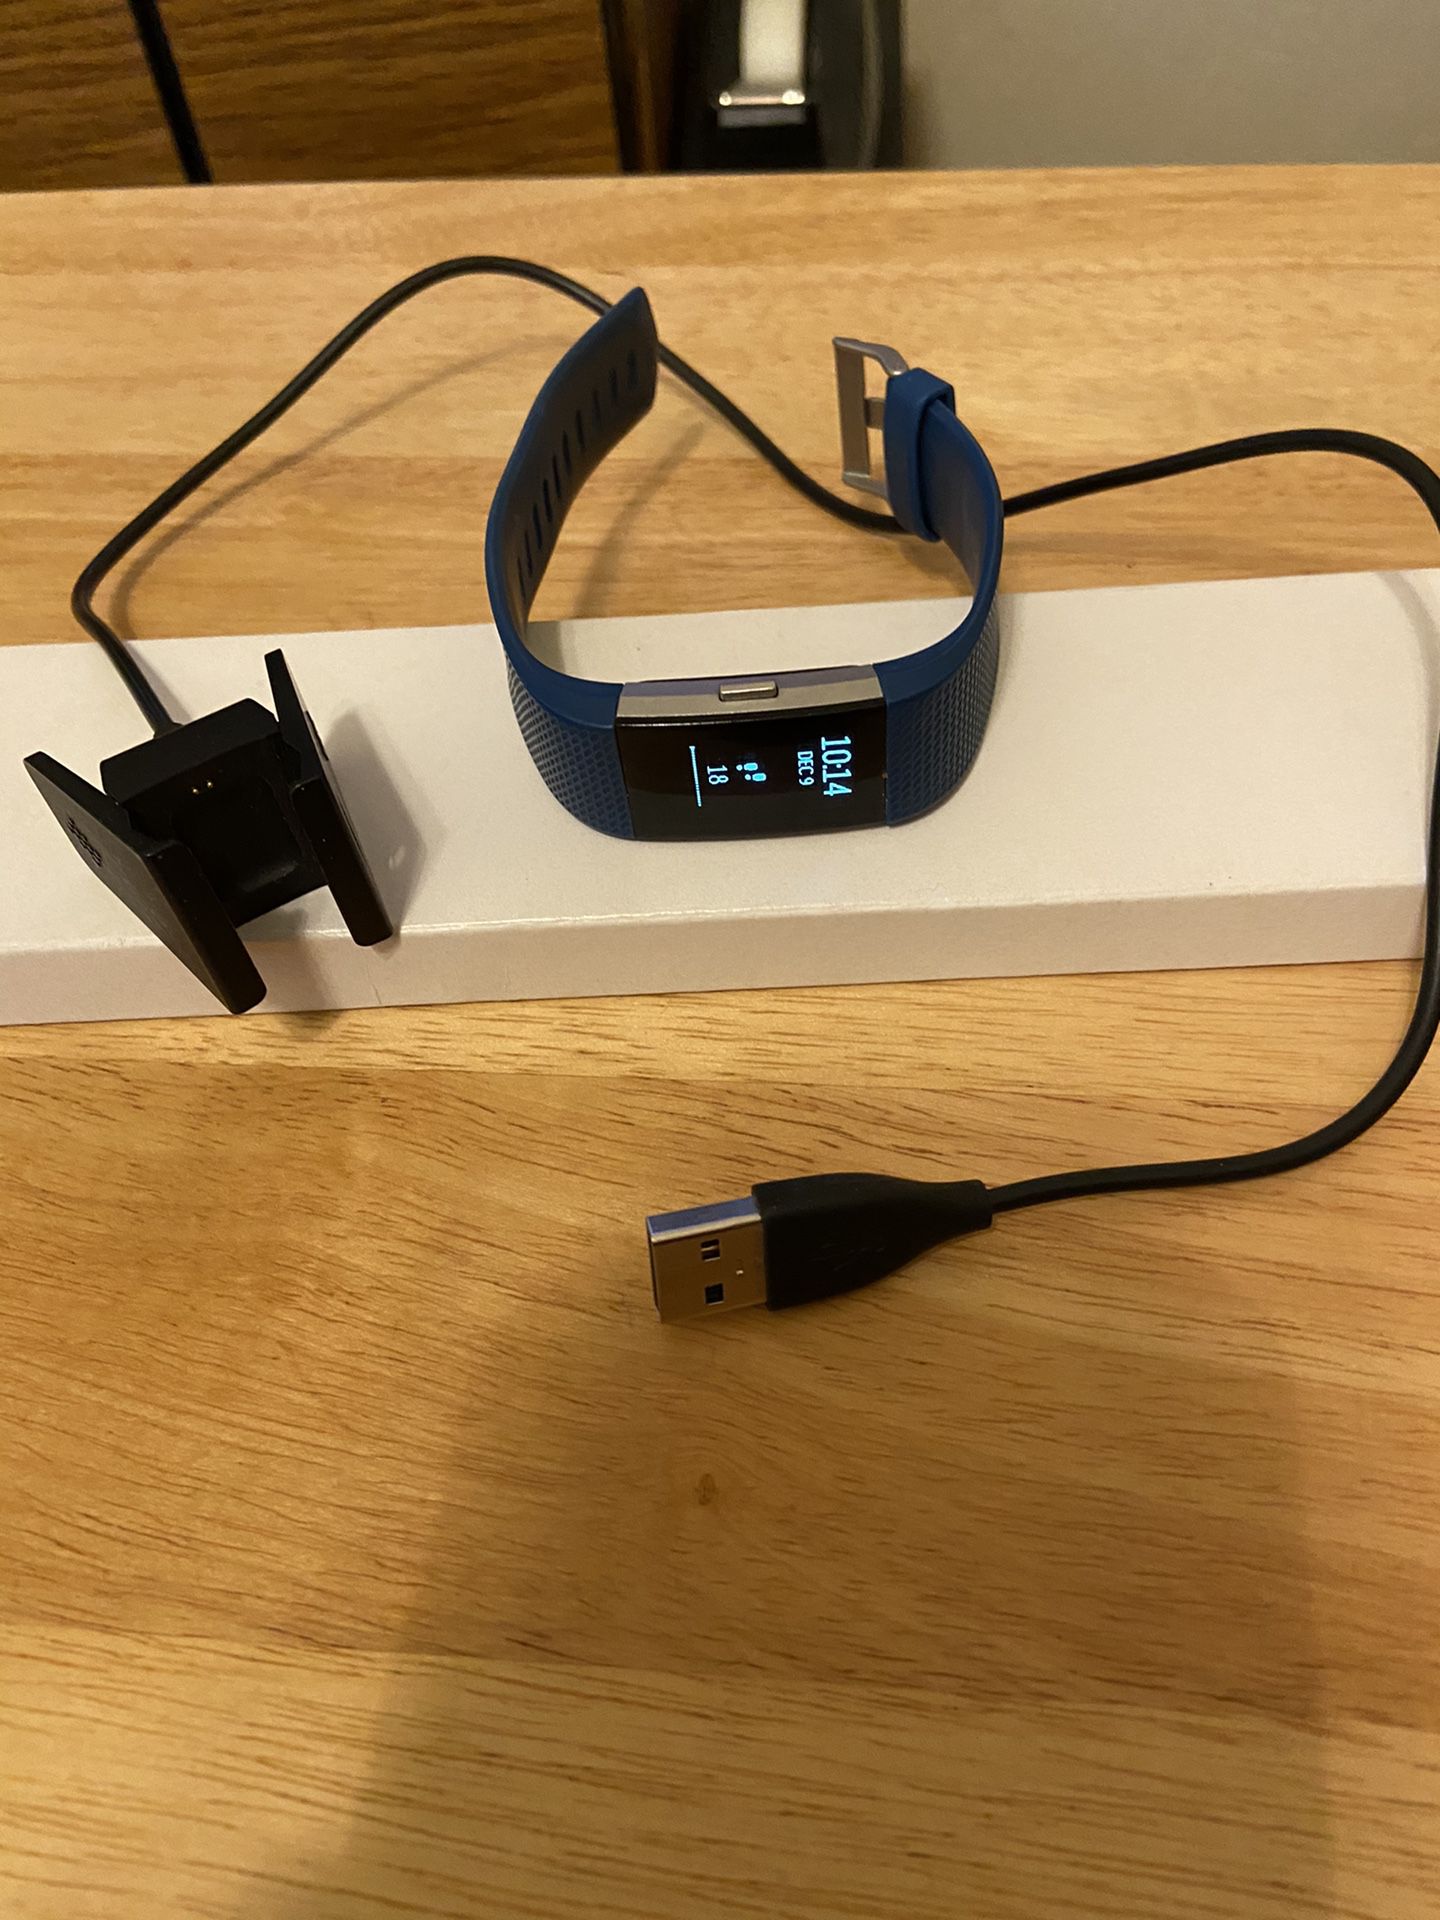 Fitbit Charge 2 Fitness Tracker with Blue Wristband